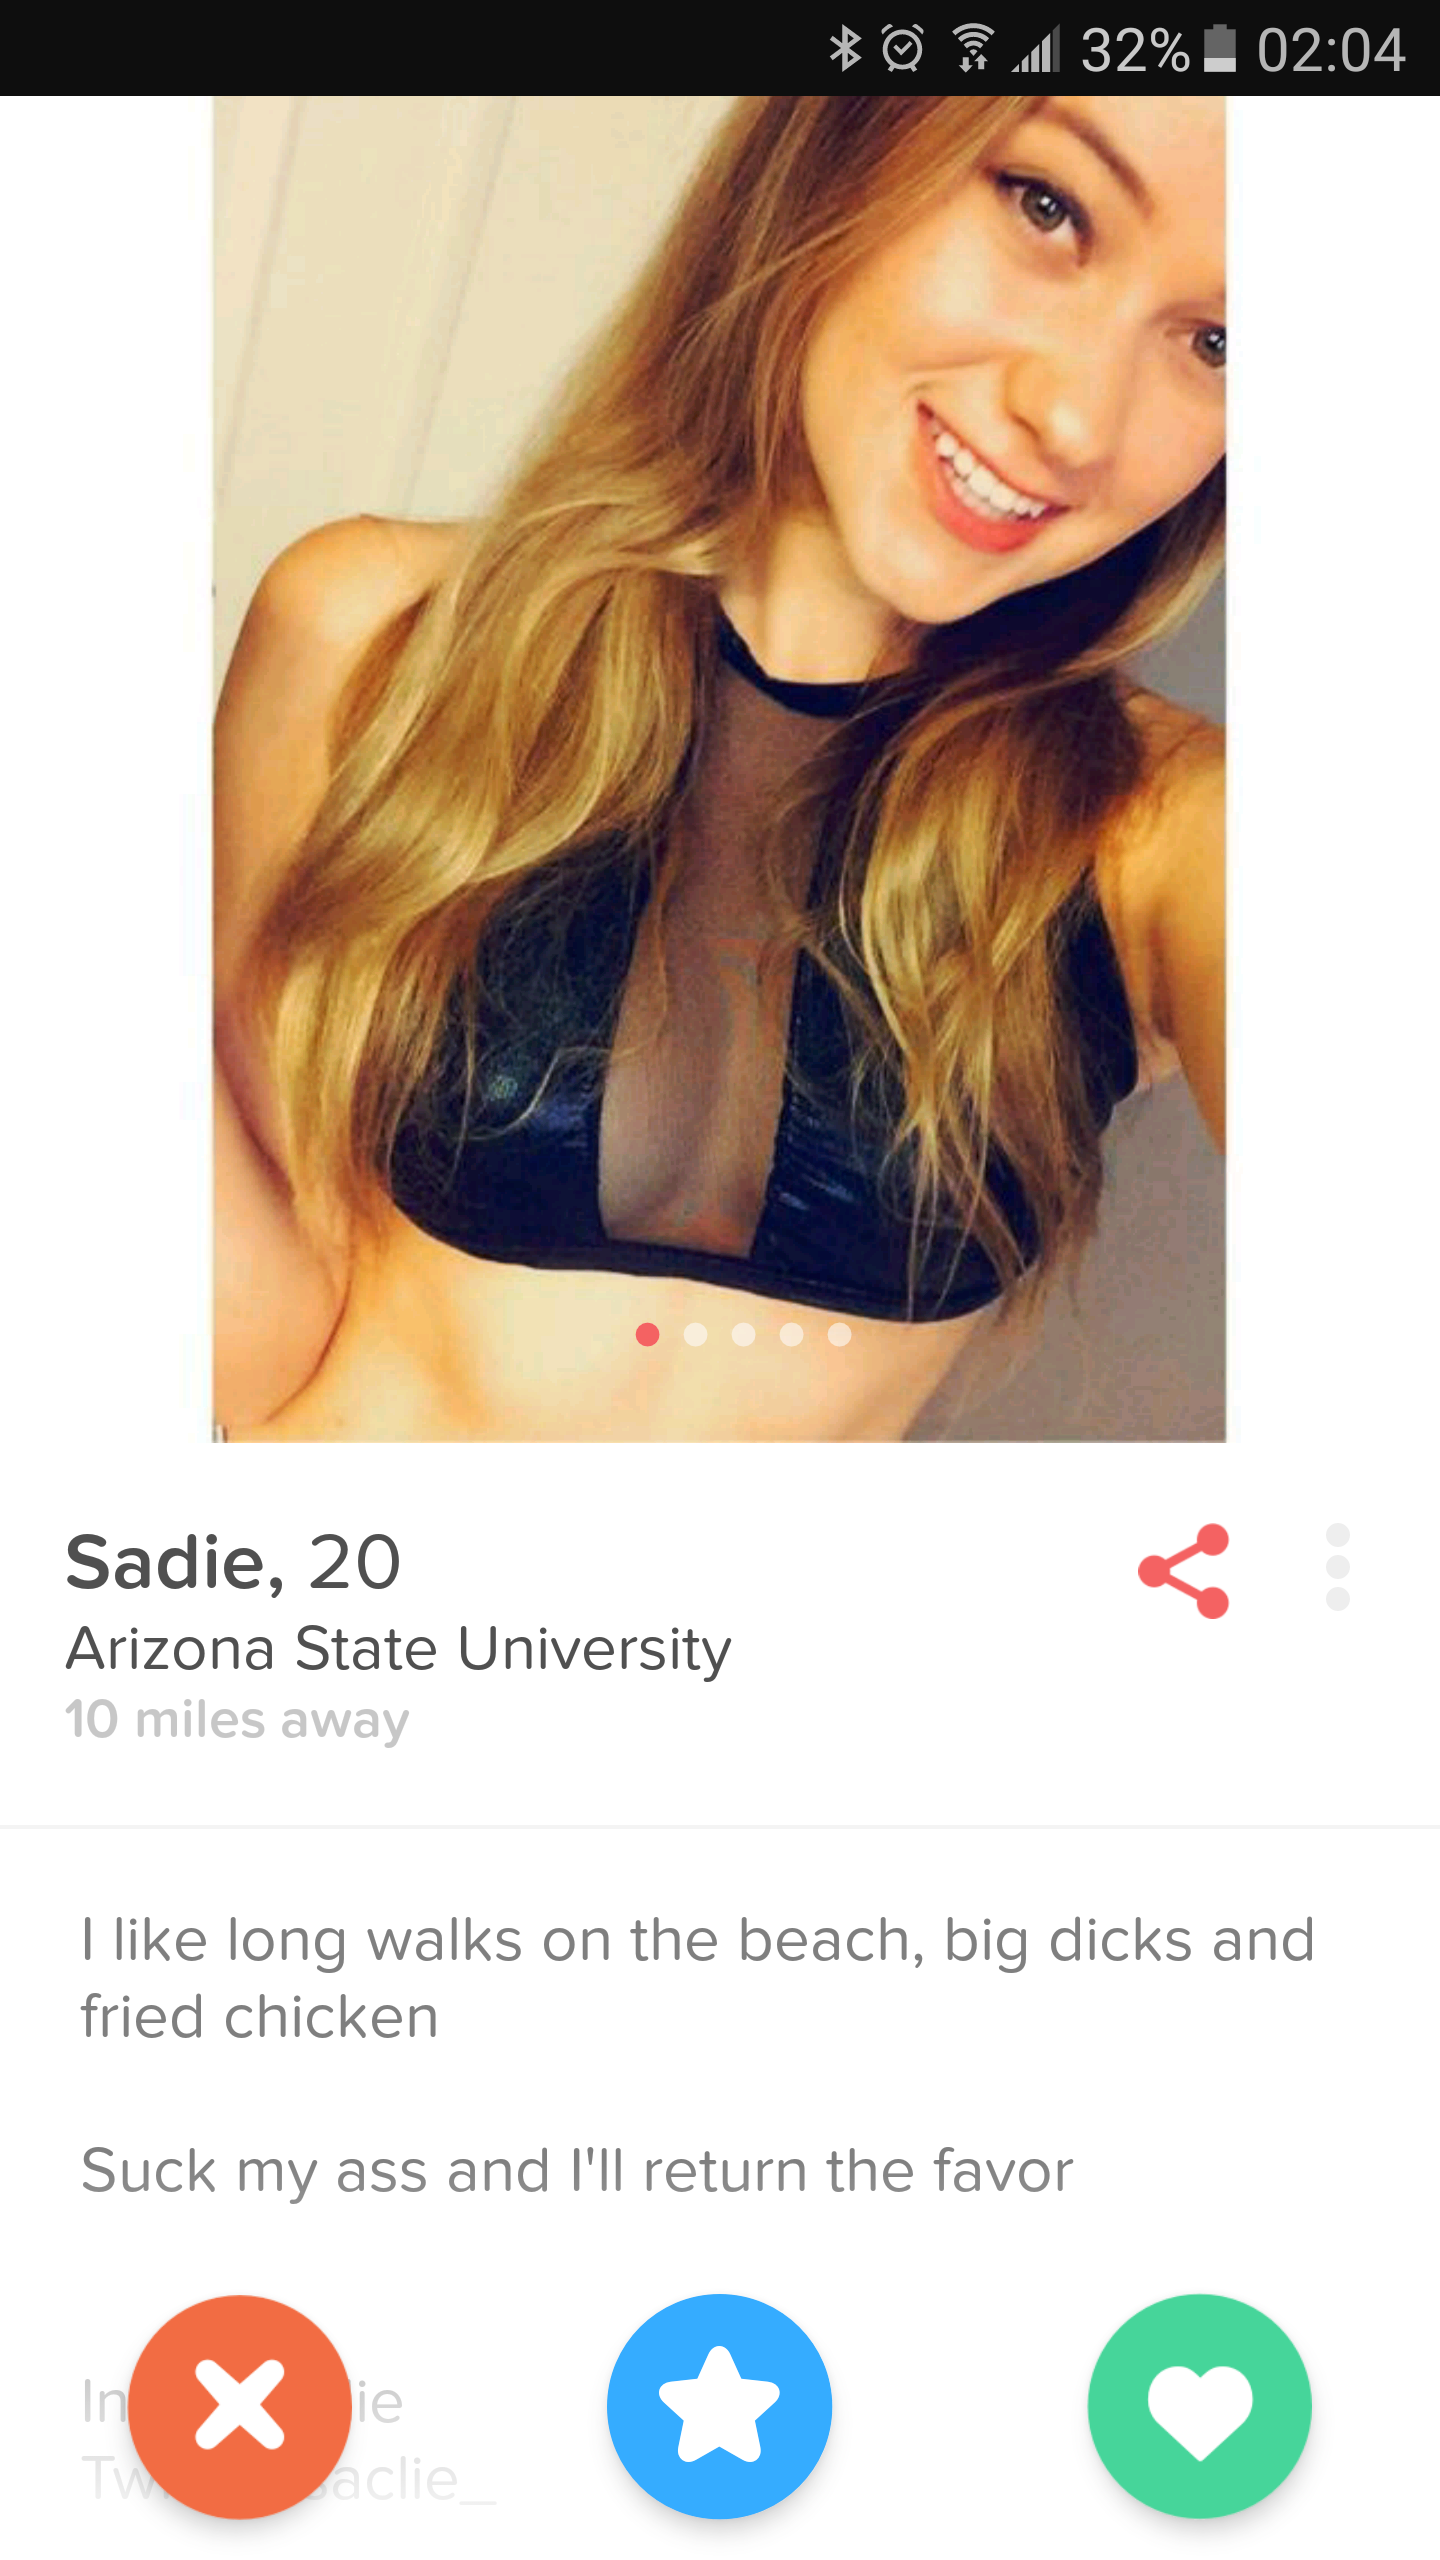 tinder ass - 0 .32% Sadie, 20 Arizona State University 10 miles away I long walks on the beach, big dicks and fried chicken Suck my ass and I'll return the favor